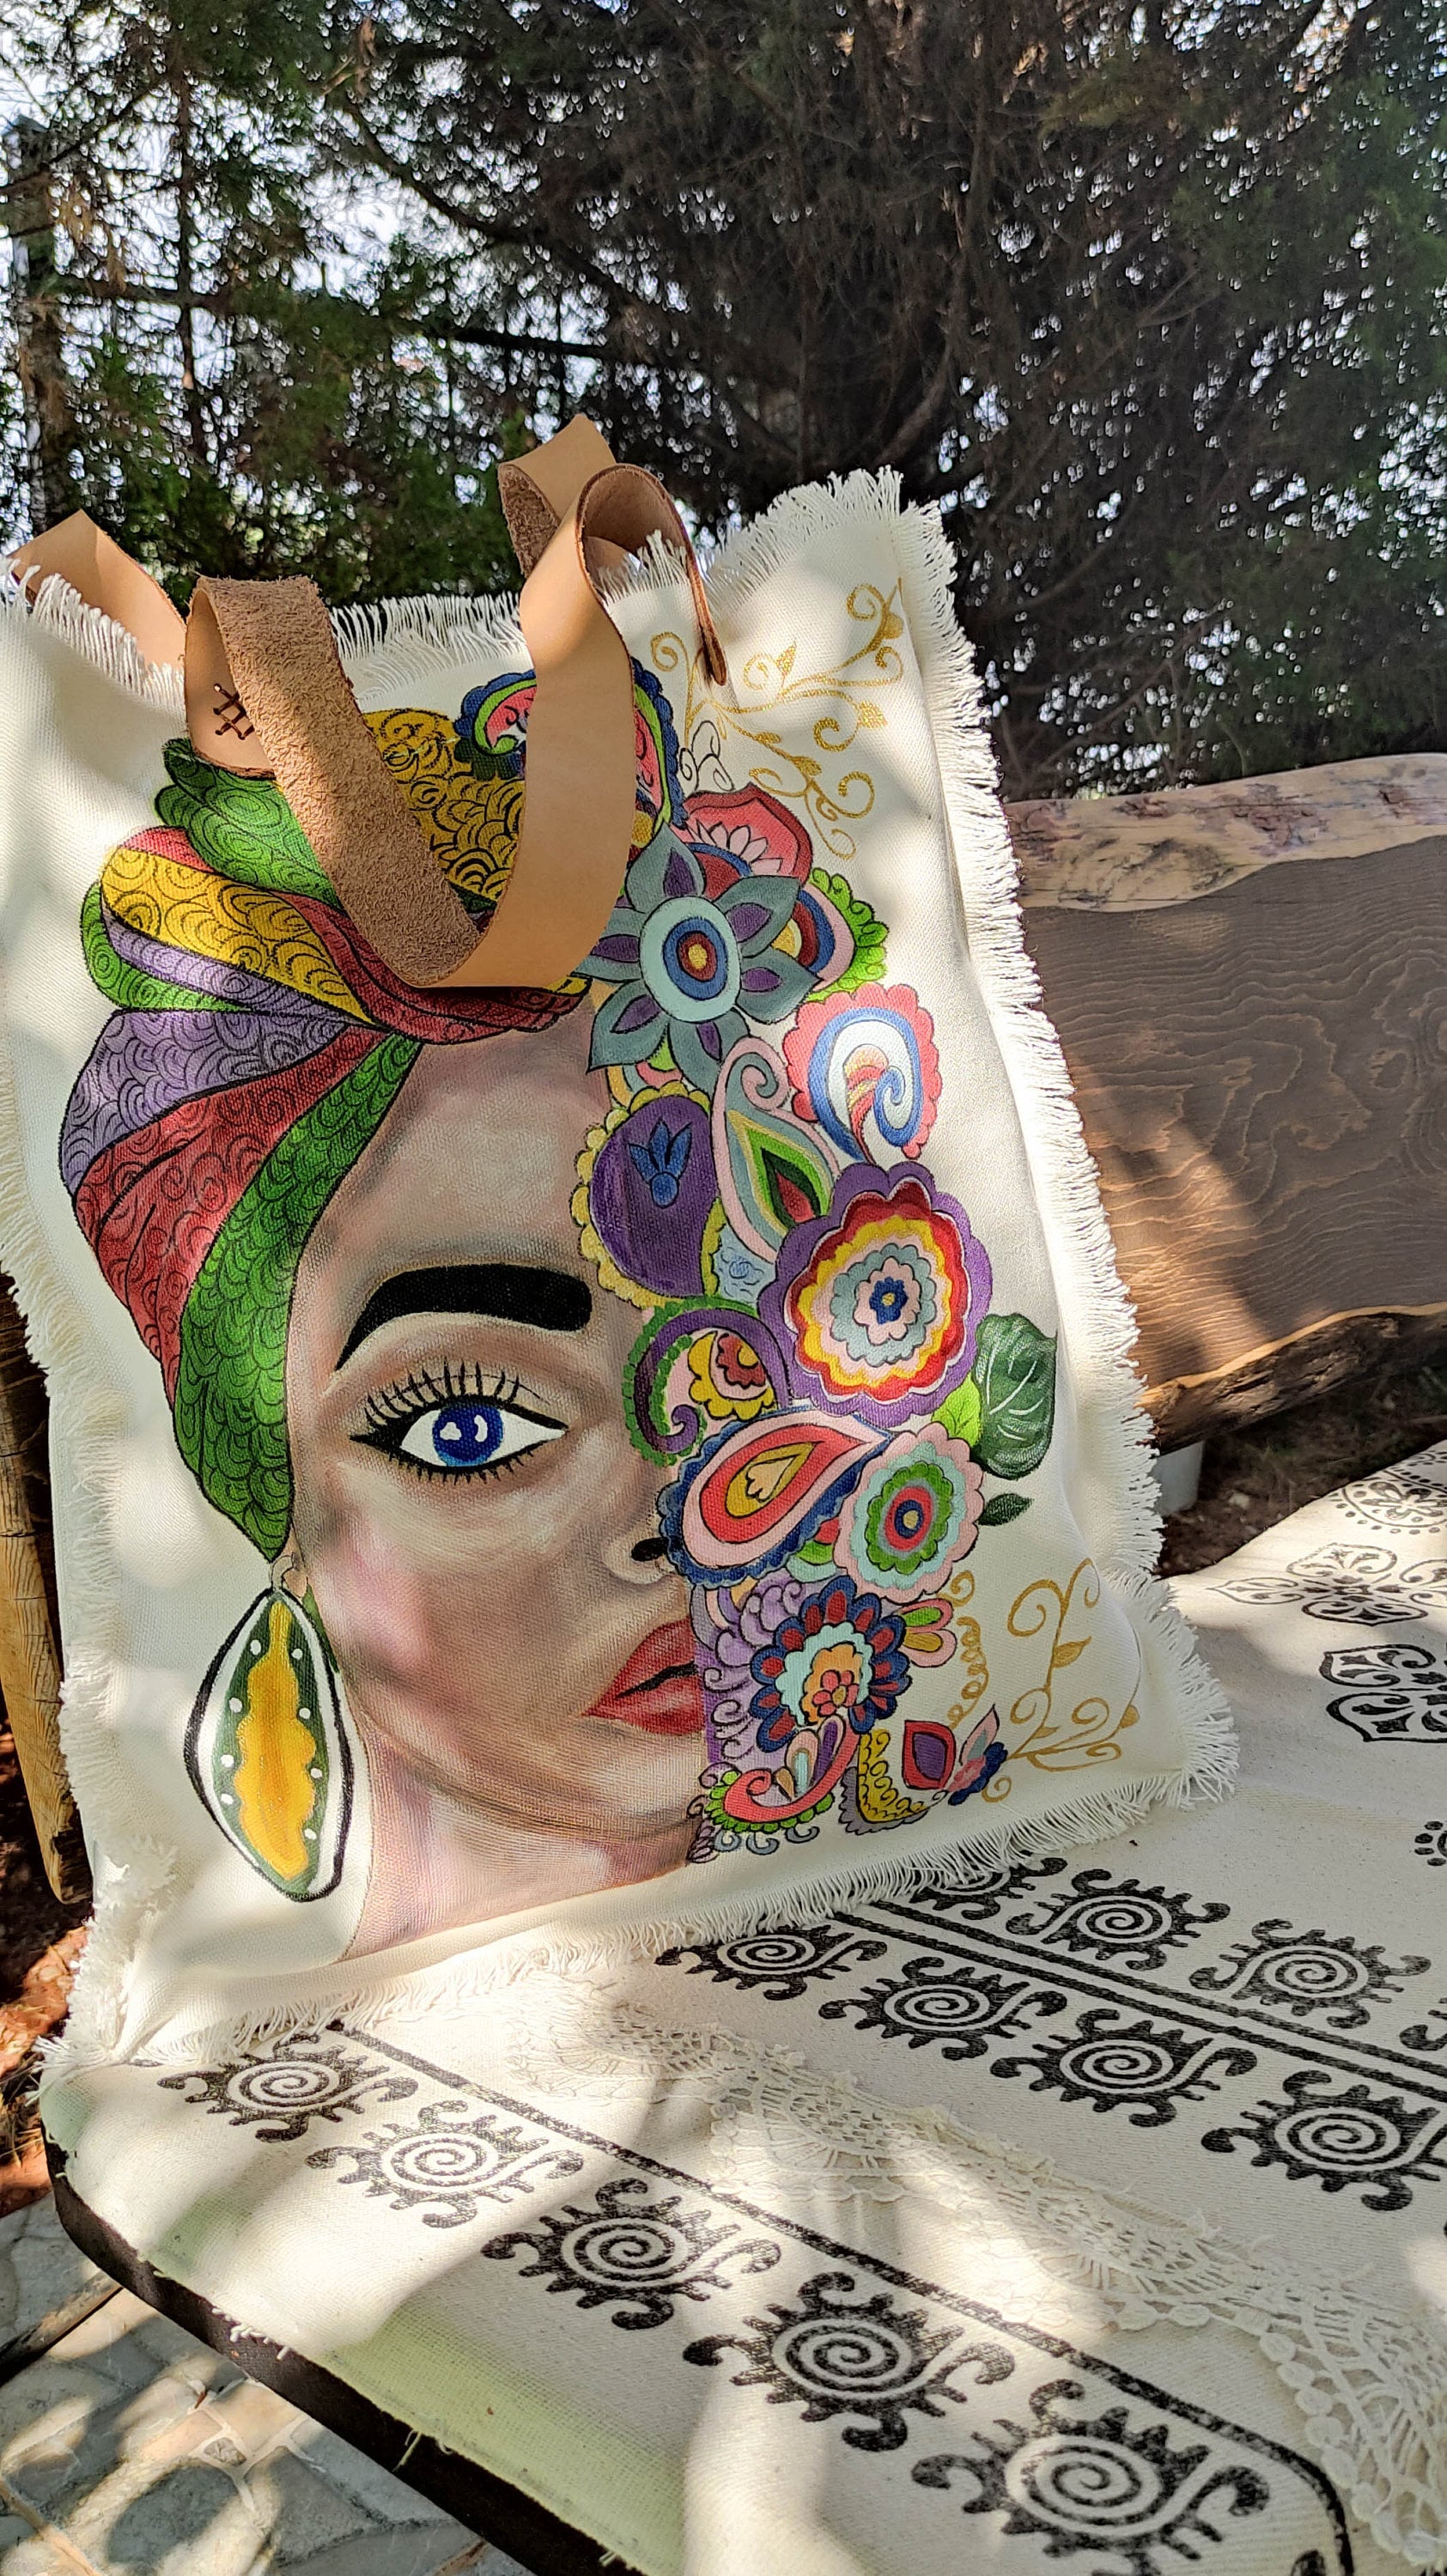 Our Tote bags come in various sizes and designs, All 100% cotton and natural paint that are hand painted or block printed which is definitely a stand out! 